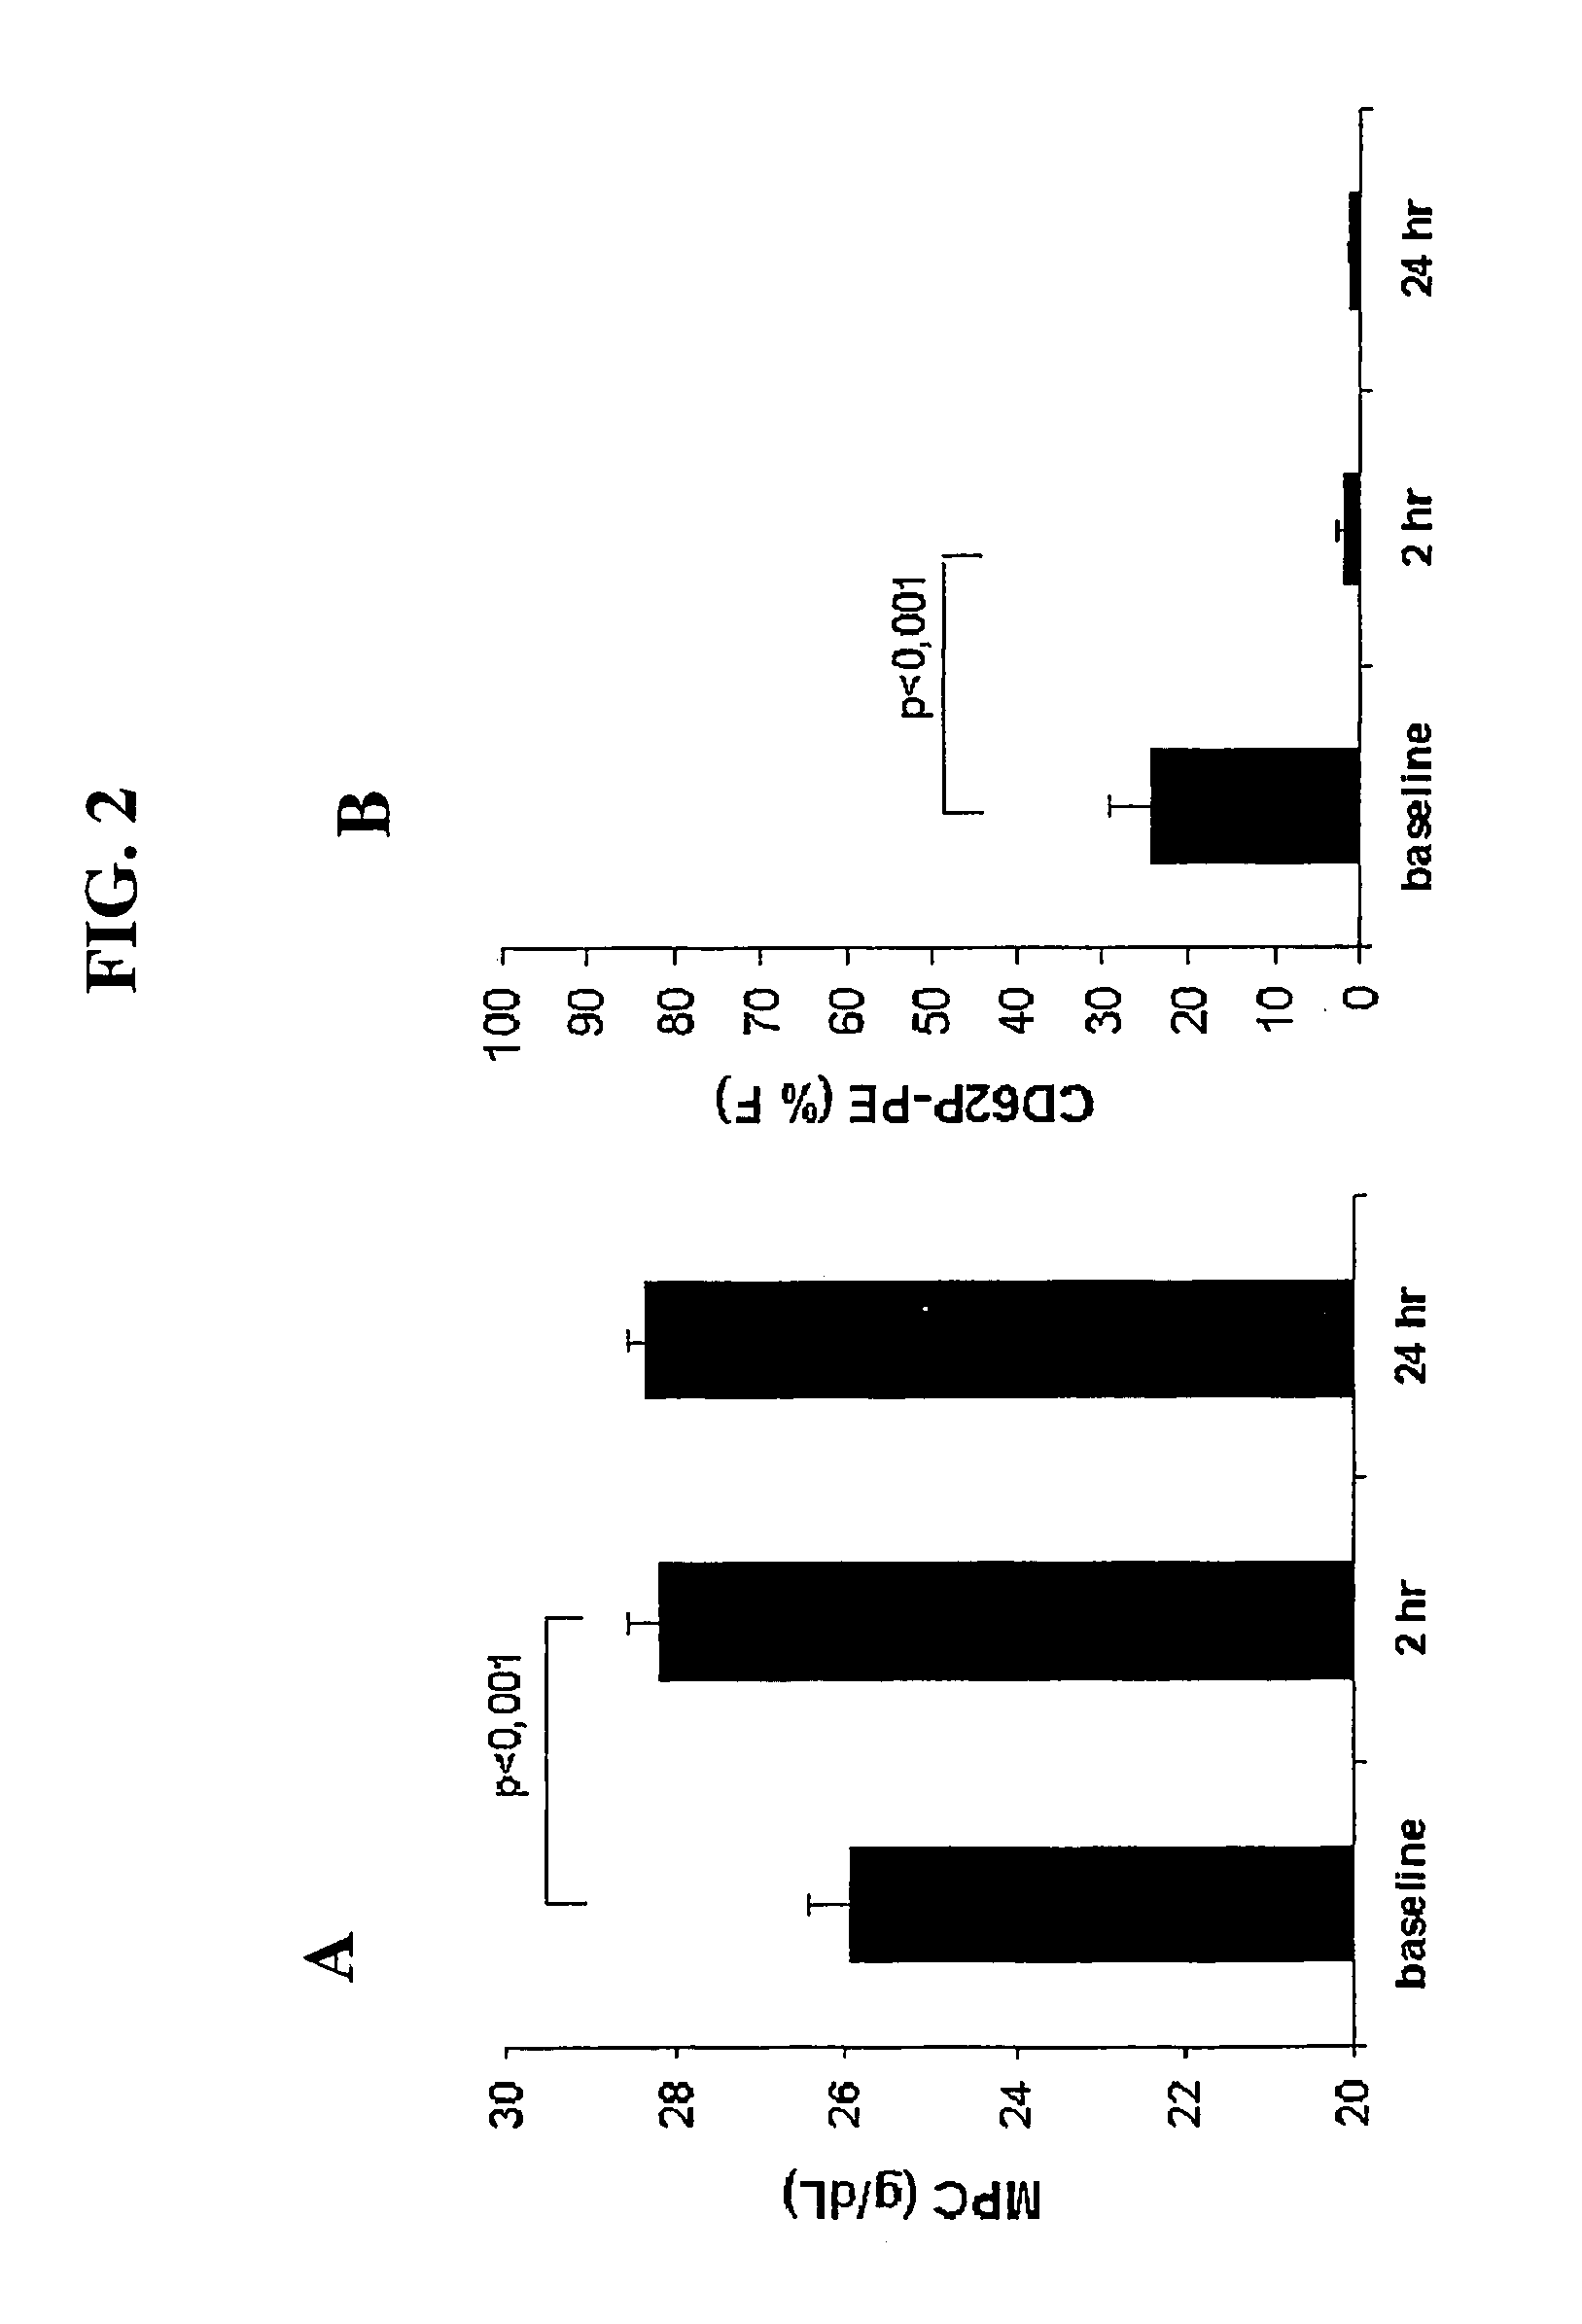 Methods for monitoring patients for efficacy of an antiplatelet therapy regimen